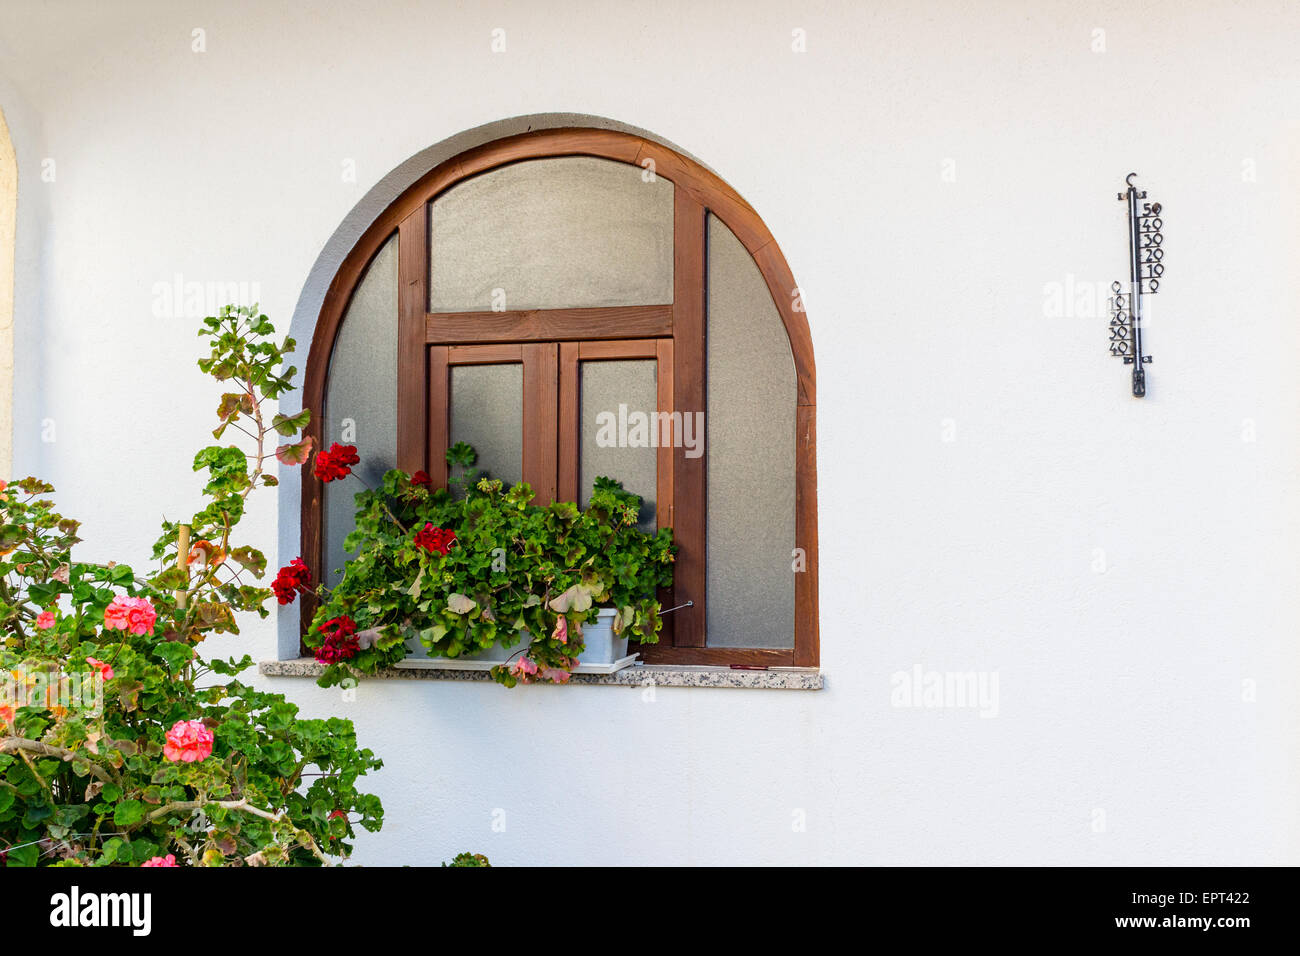 https://c8.alamy.com/comp/EPT422/rounded-wood-frame-window-with-red-geraniums-flower-pots-and-black-EPT422.jpg